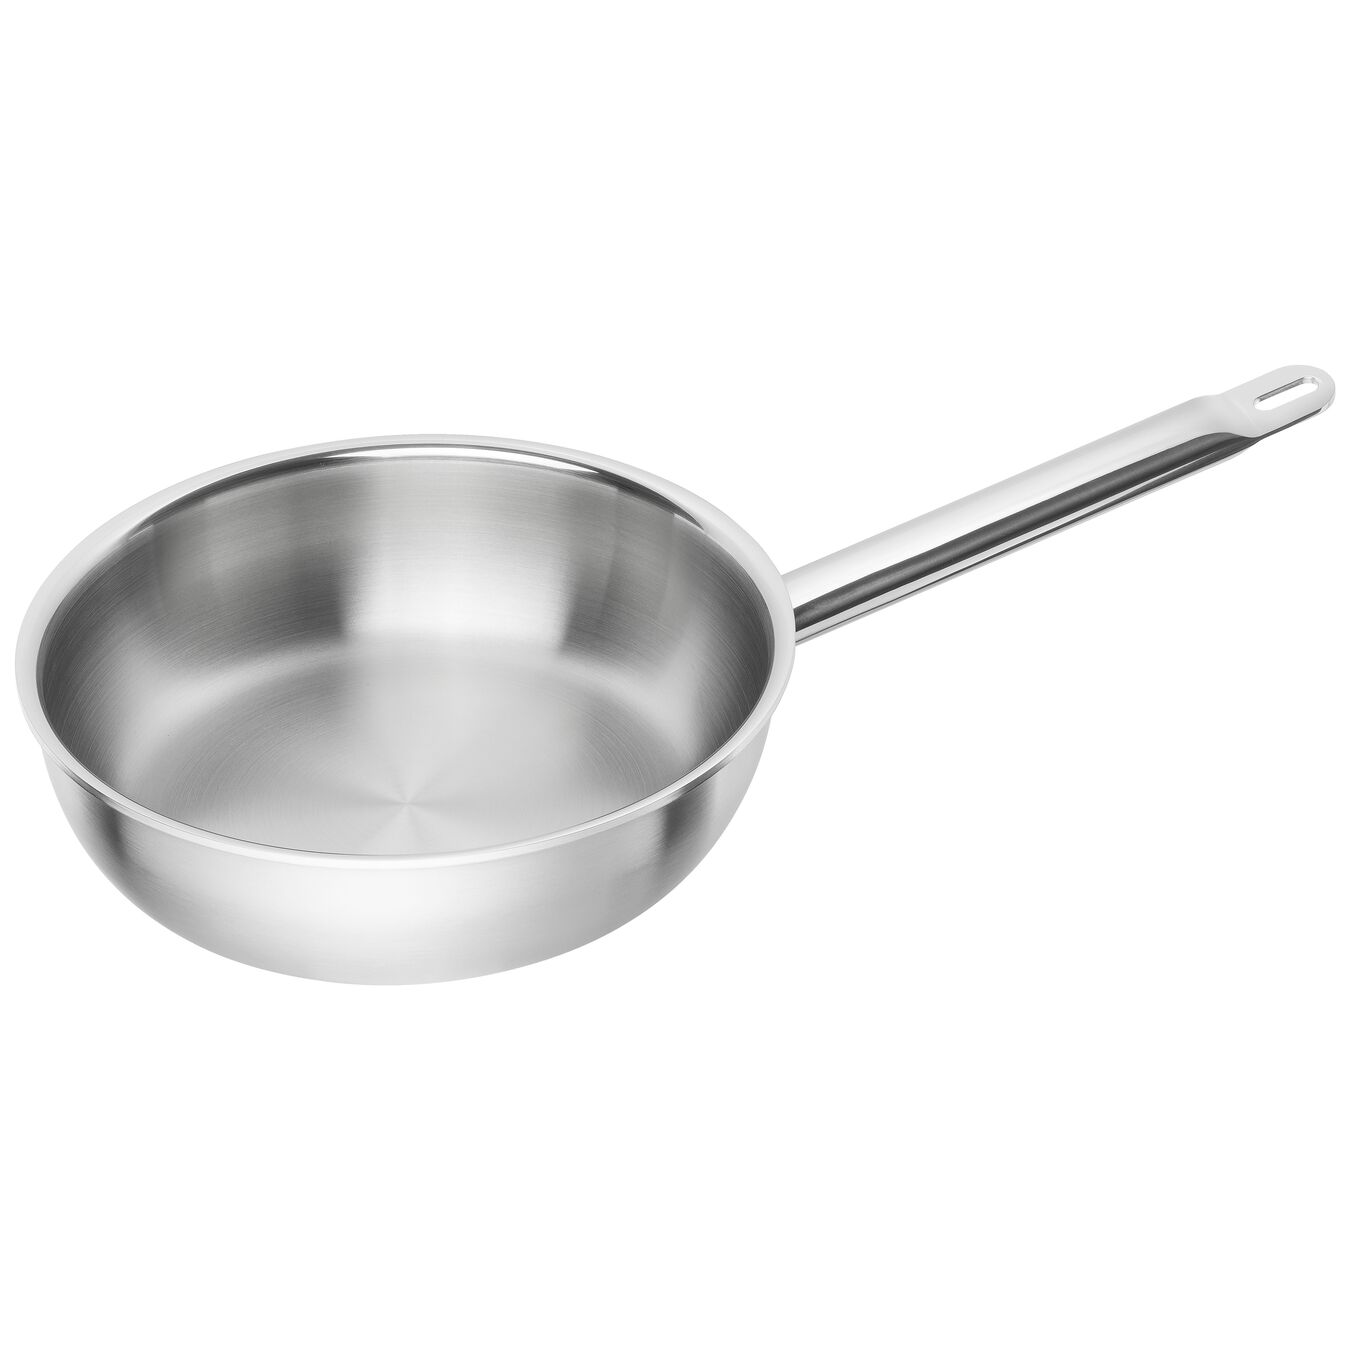 24 cm / 9.5 inch 18/10 Stainless Steel Frying pan,,large 1